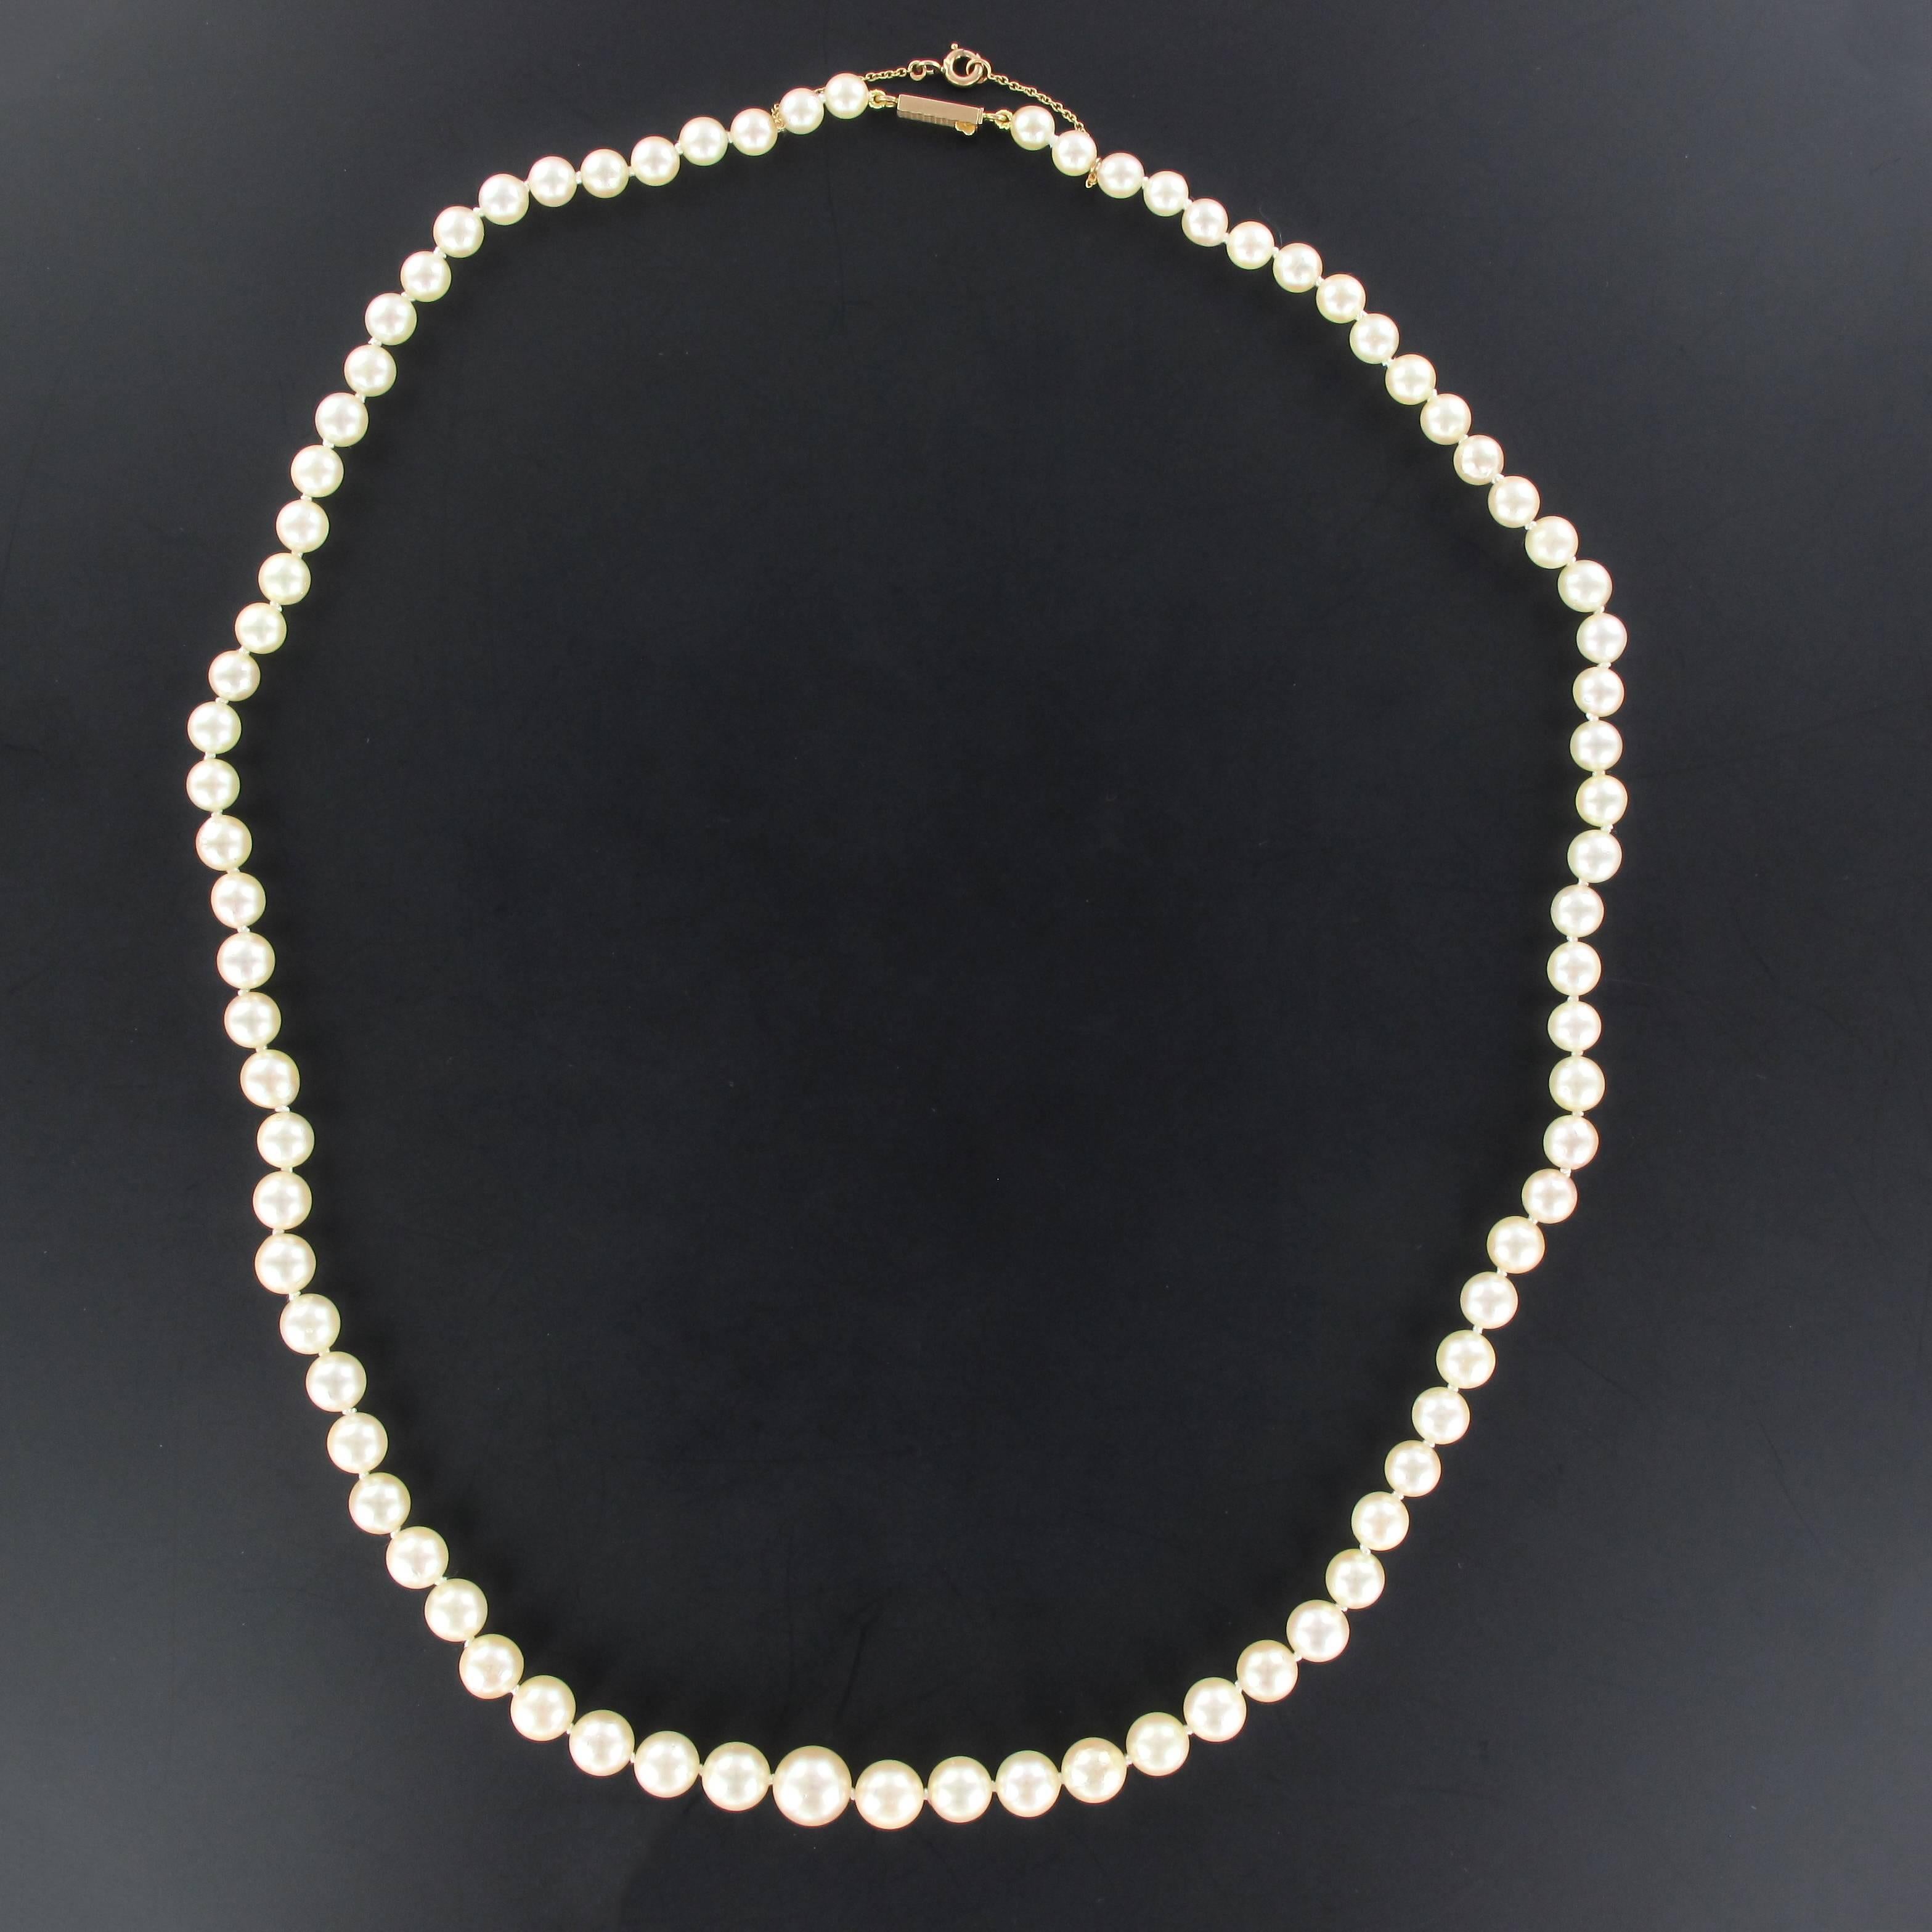 Women's 1950s Japanese Cultured Round White Pearl Necklace